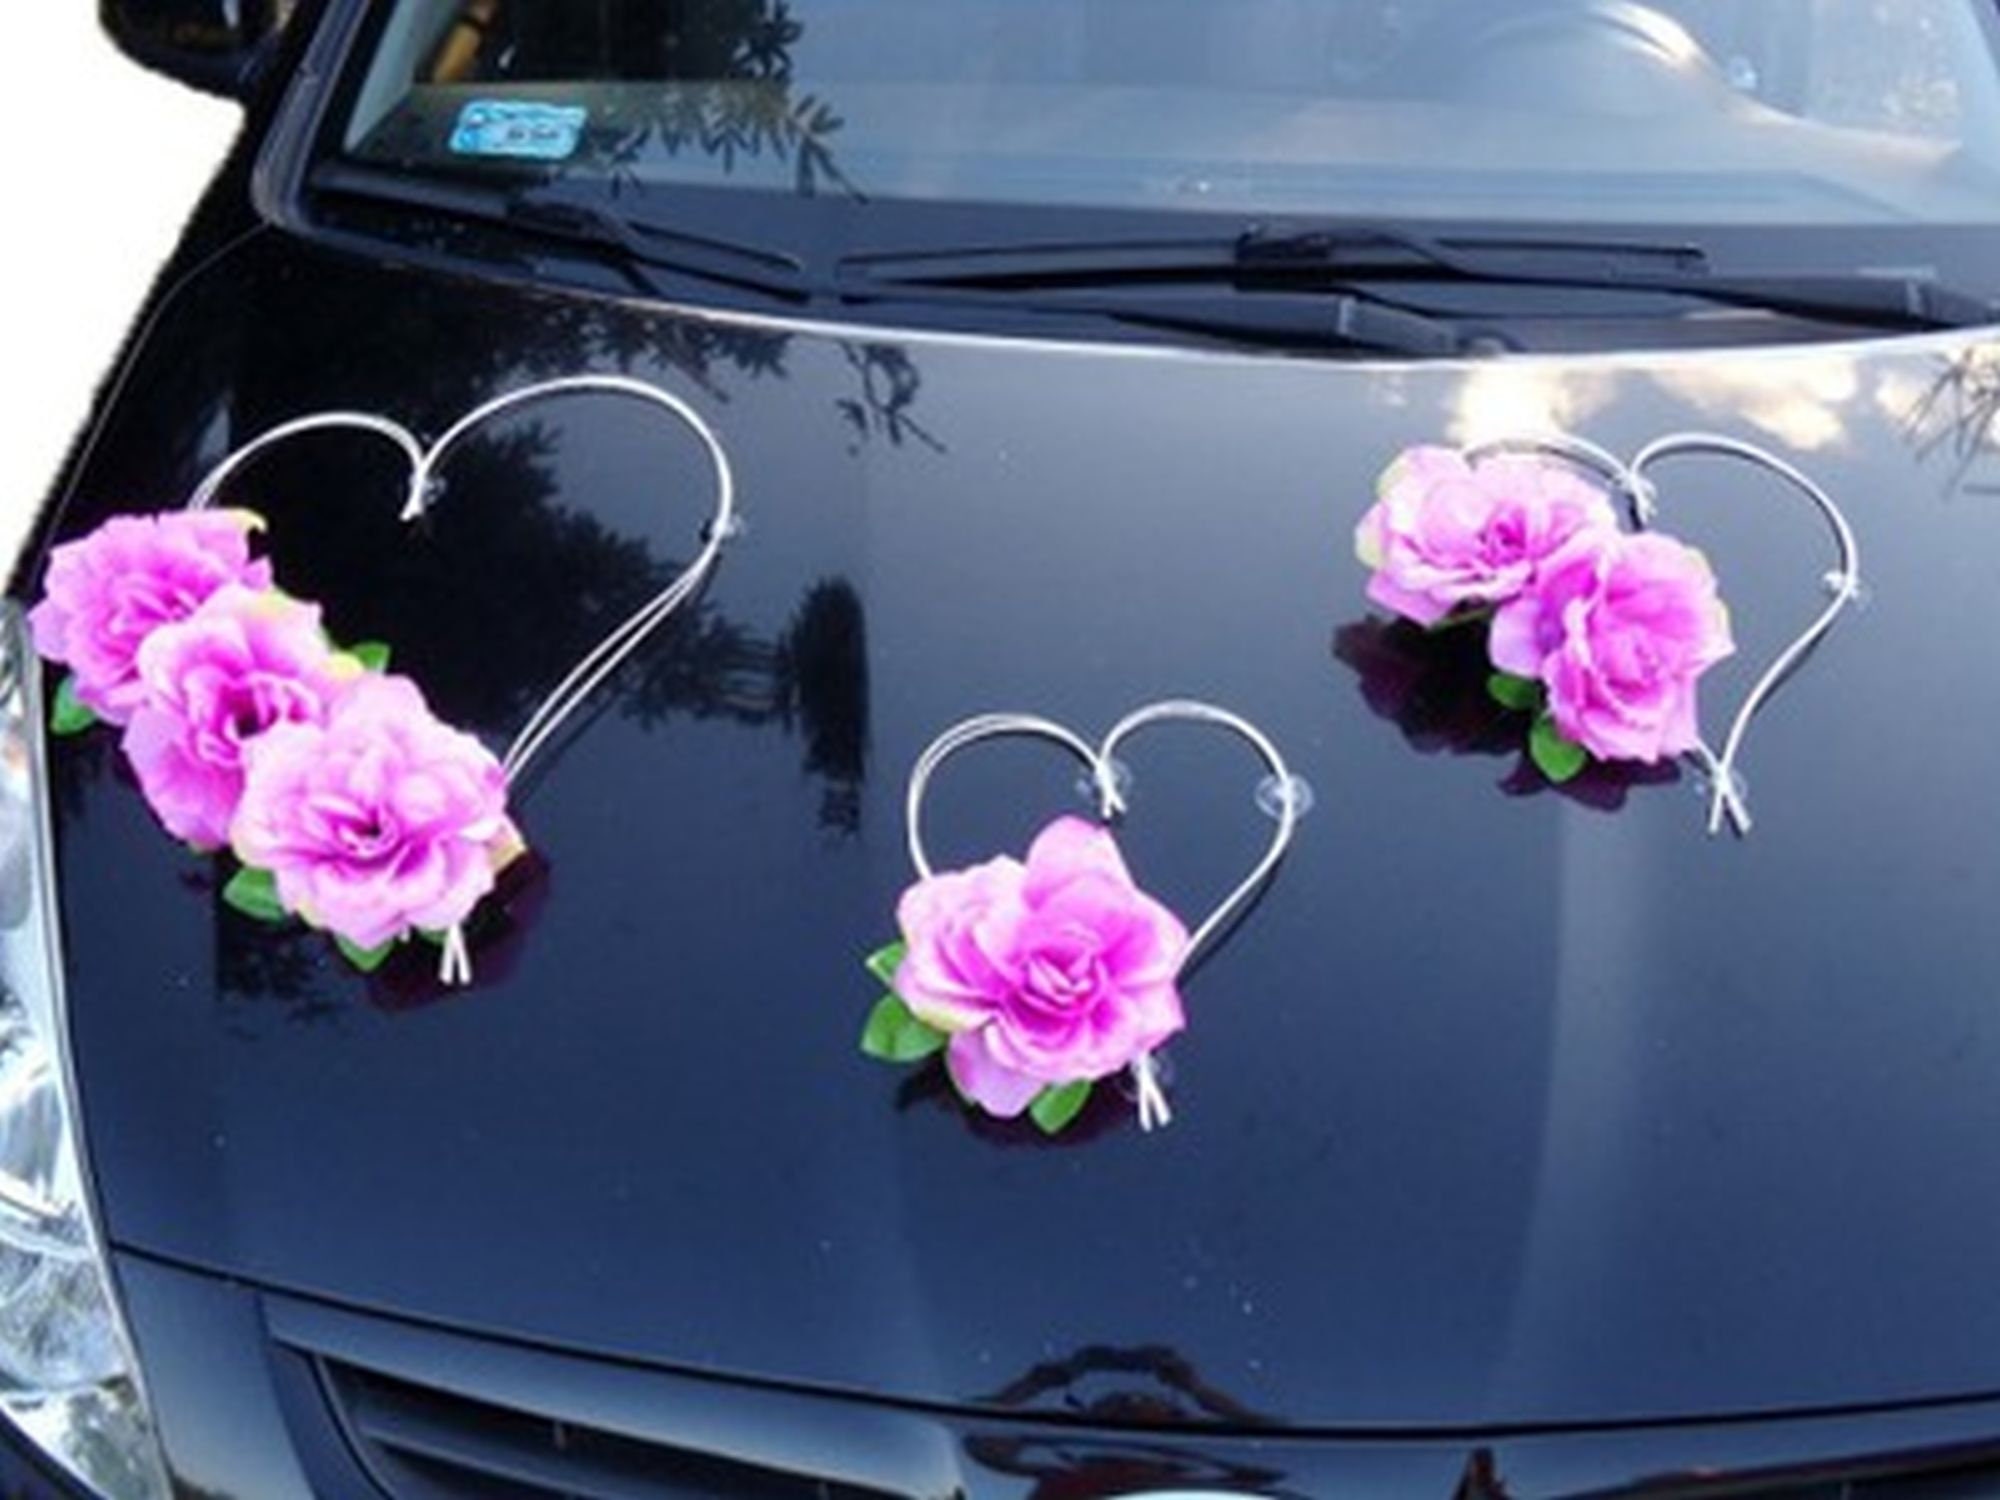 Car Decoration Knot Wedding Large V Shaped Artificial Flower Wedding Car  Decoration Set Red Pink Purple Non Flowers CD50 Q03 From Yourou, $250.62